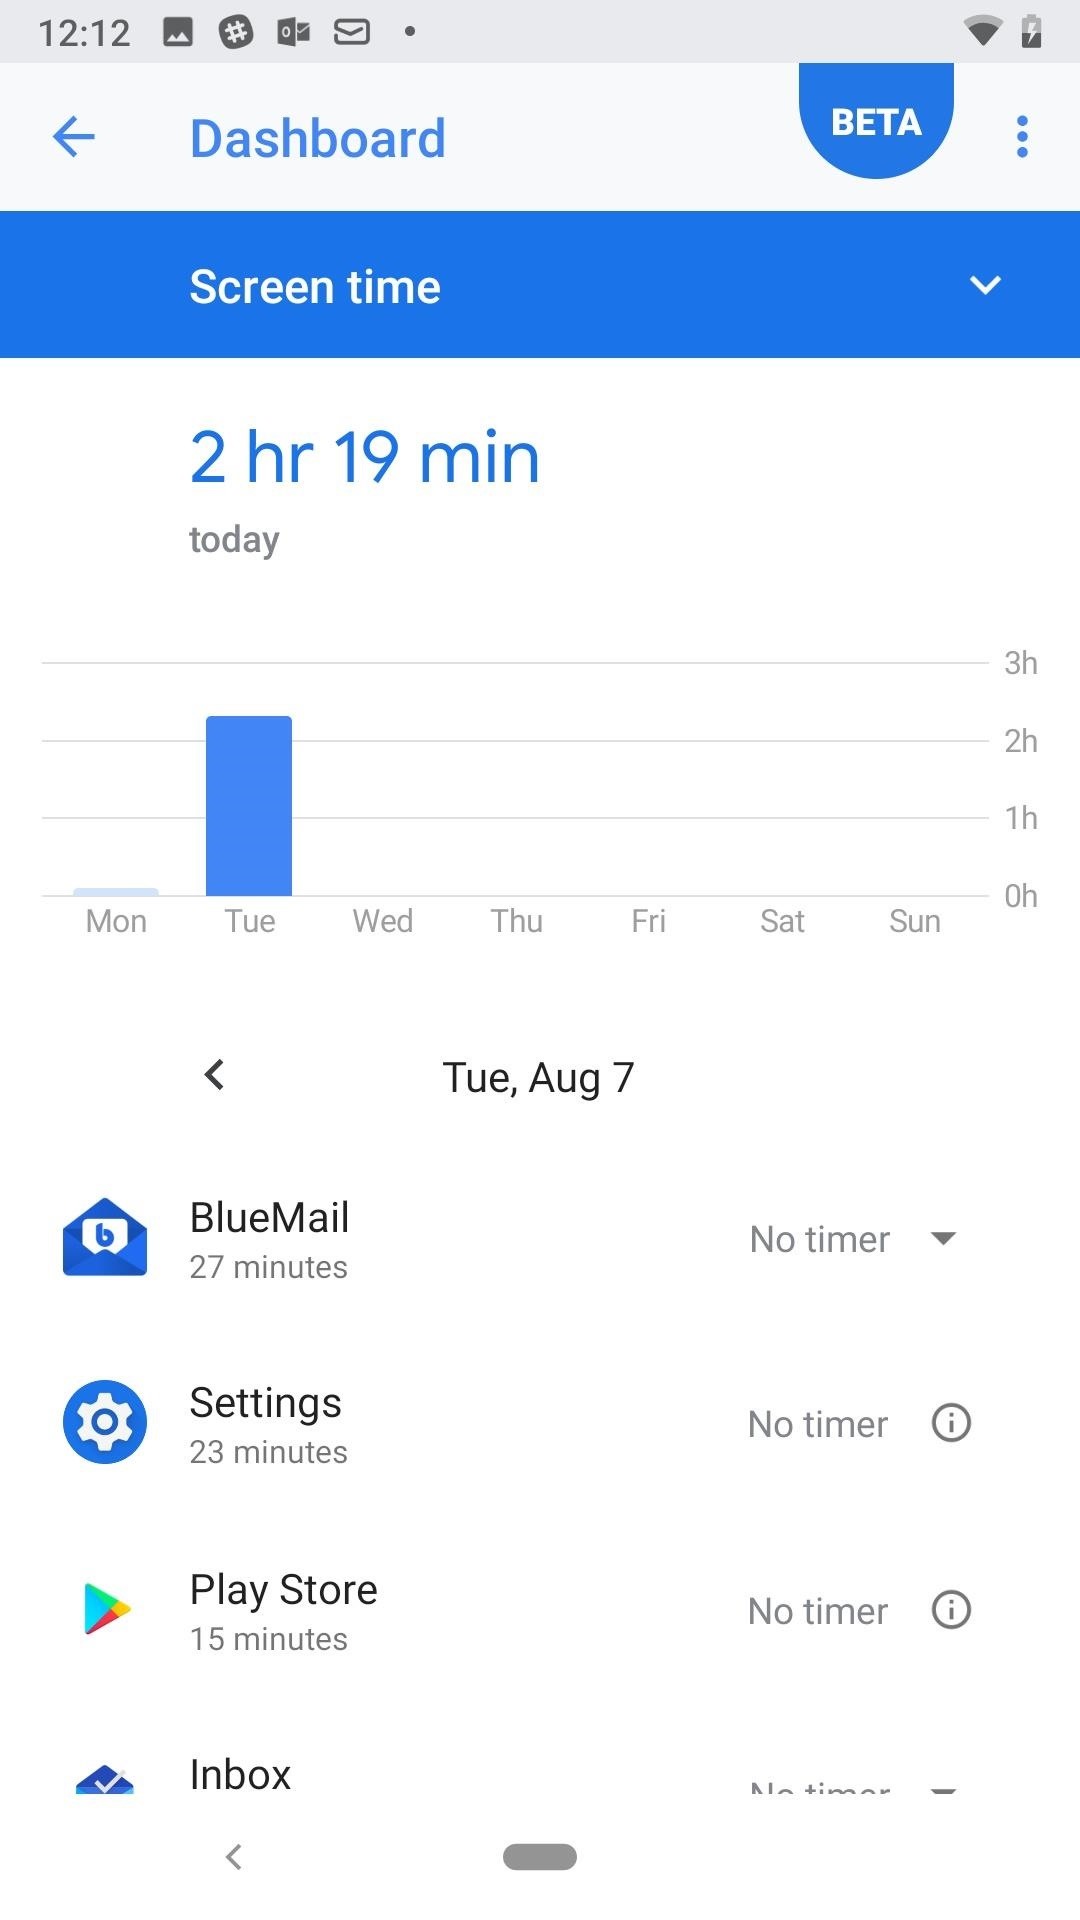 How to Set Up Digital Wellbeing in Android Pie to Curb Your Smartphone Usage